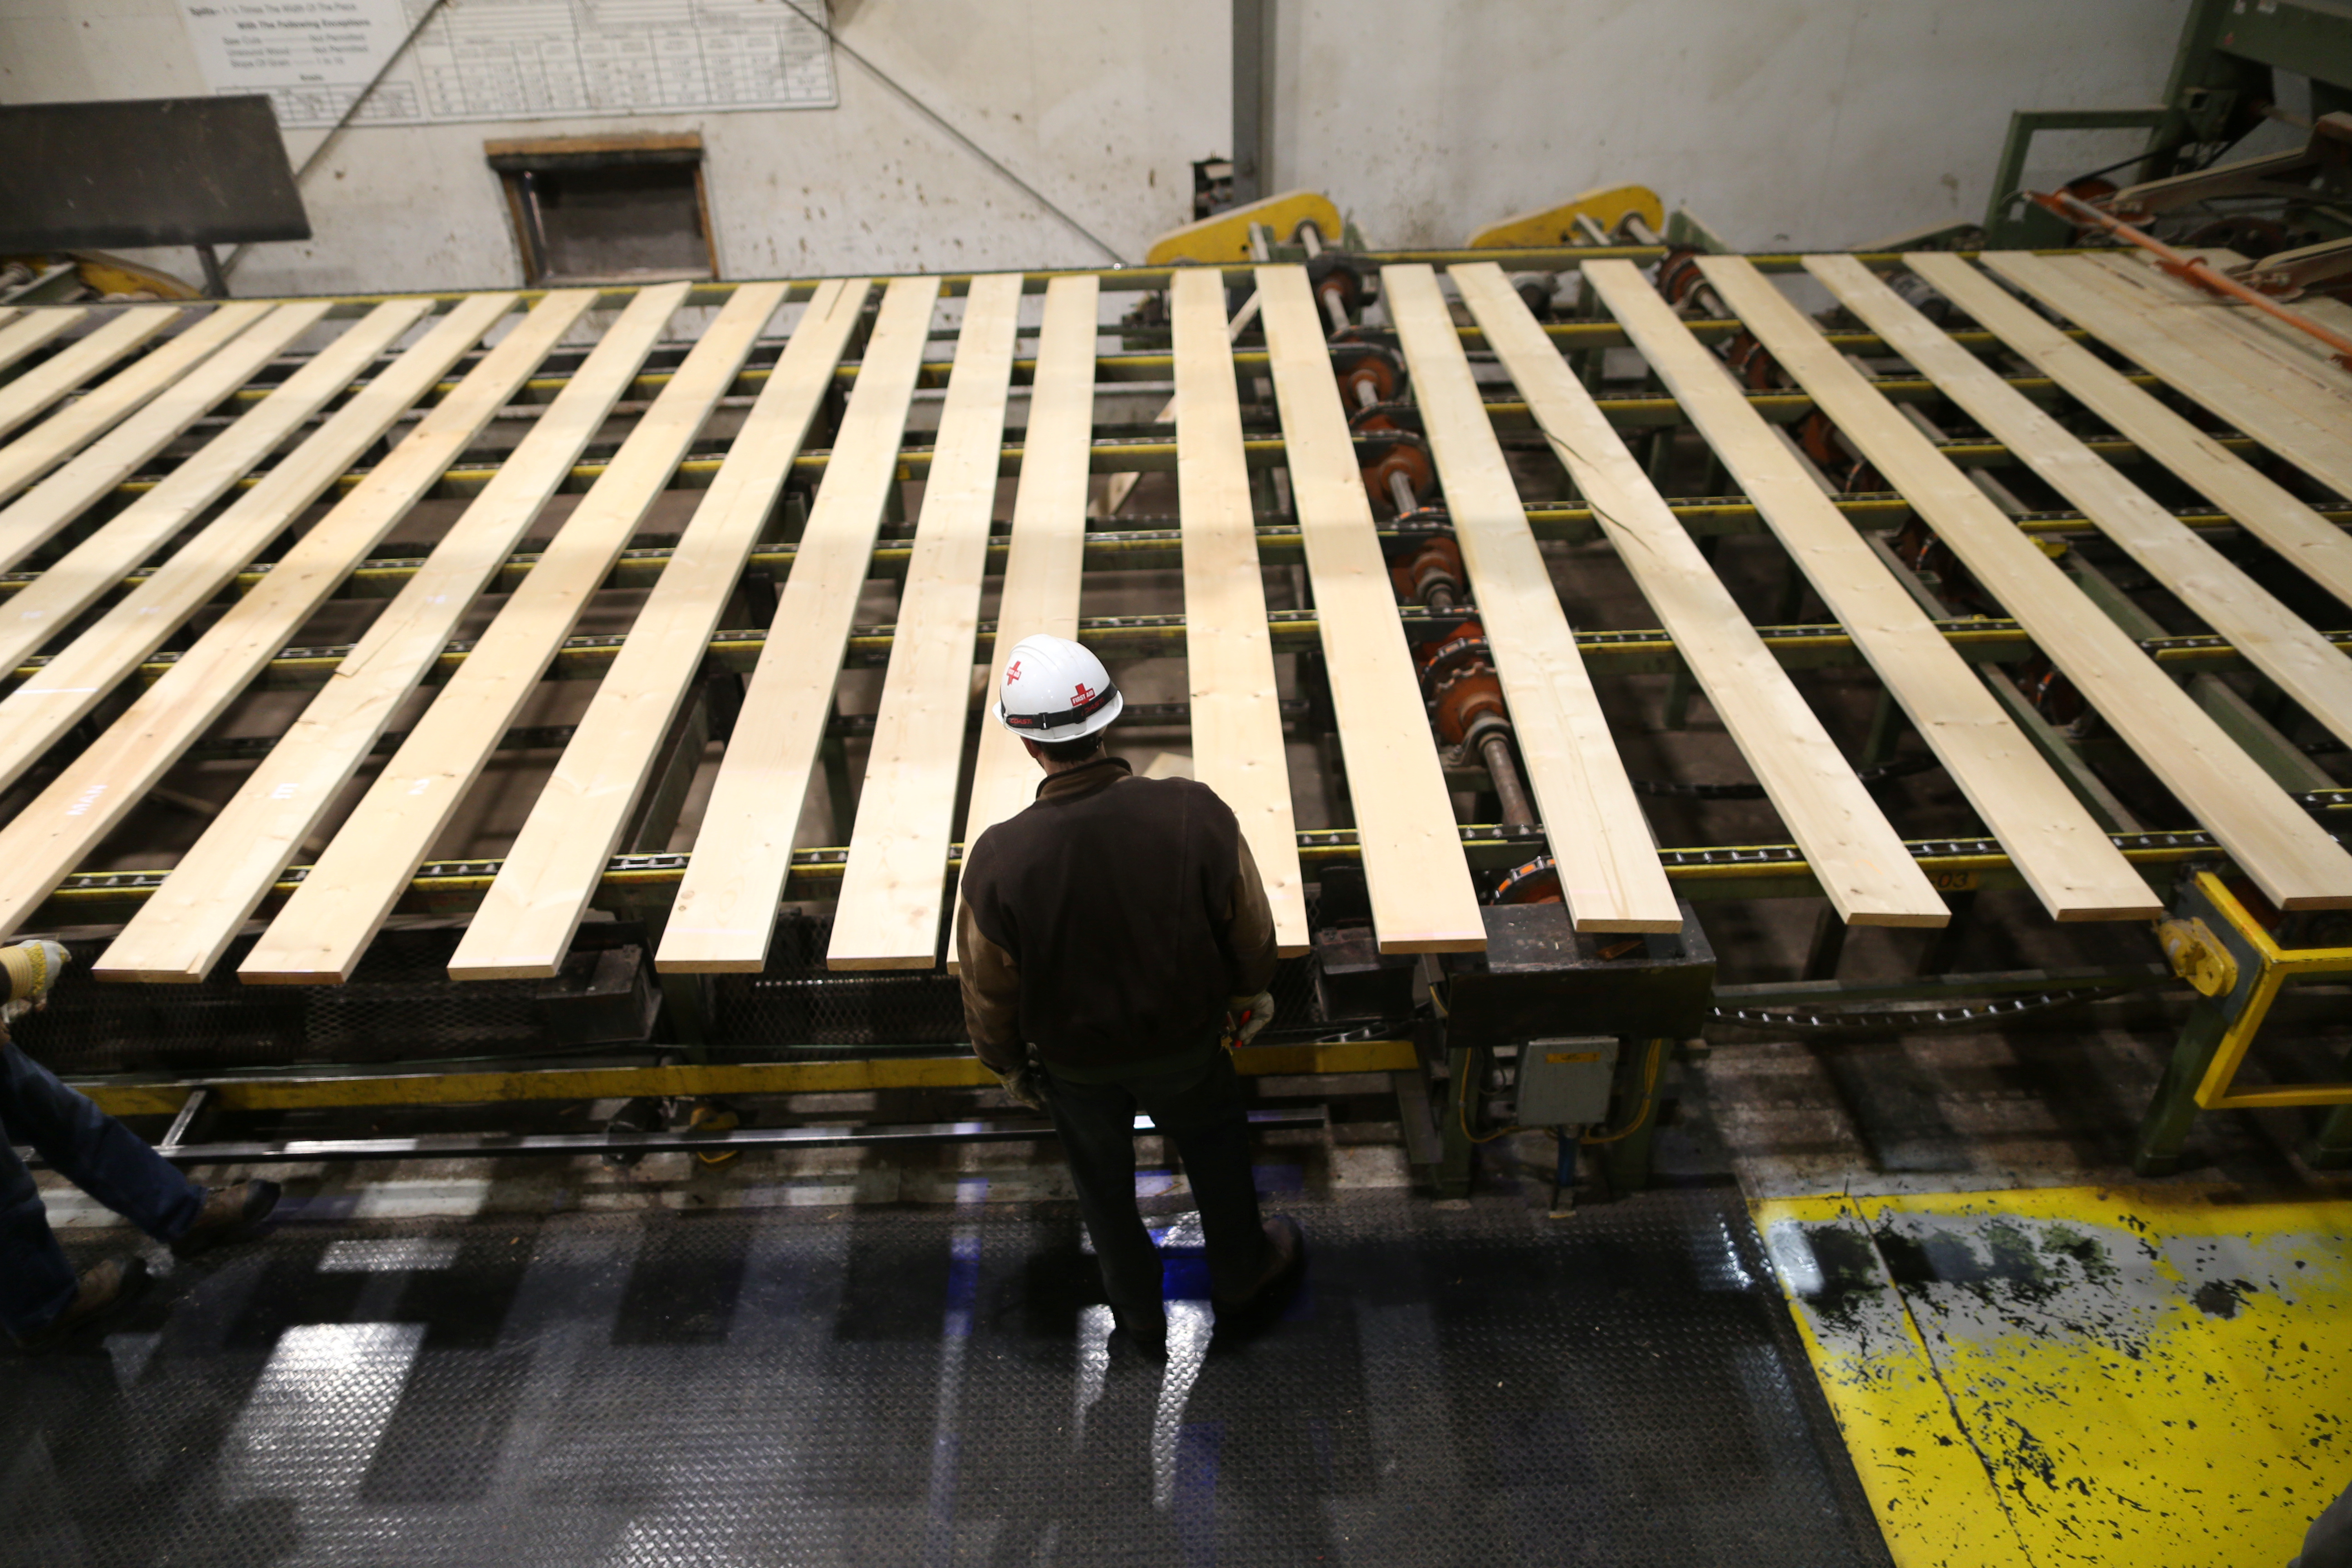 A worker inspects lumber on a conveyor belt at West Fraser Pacific Inland Resources sawmill in Smithers